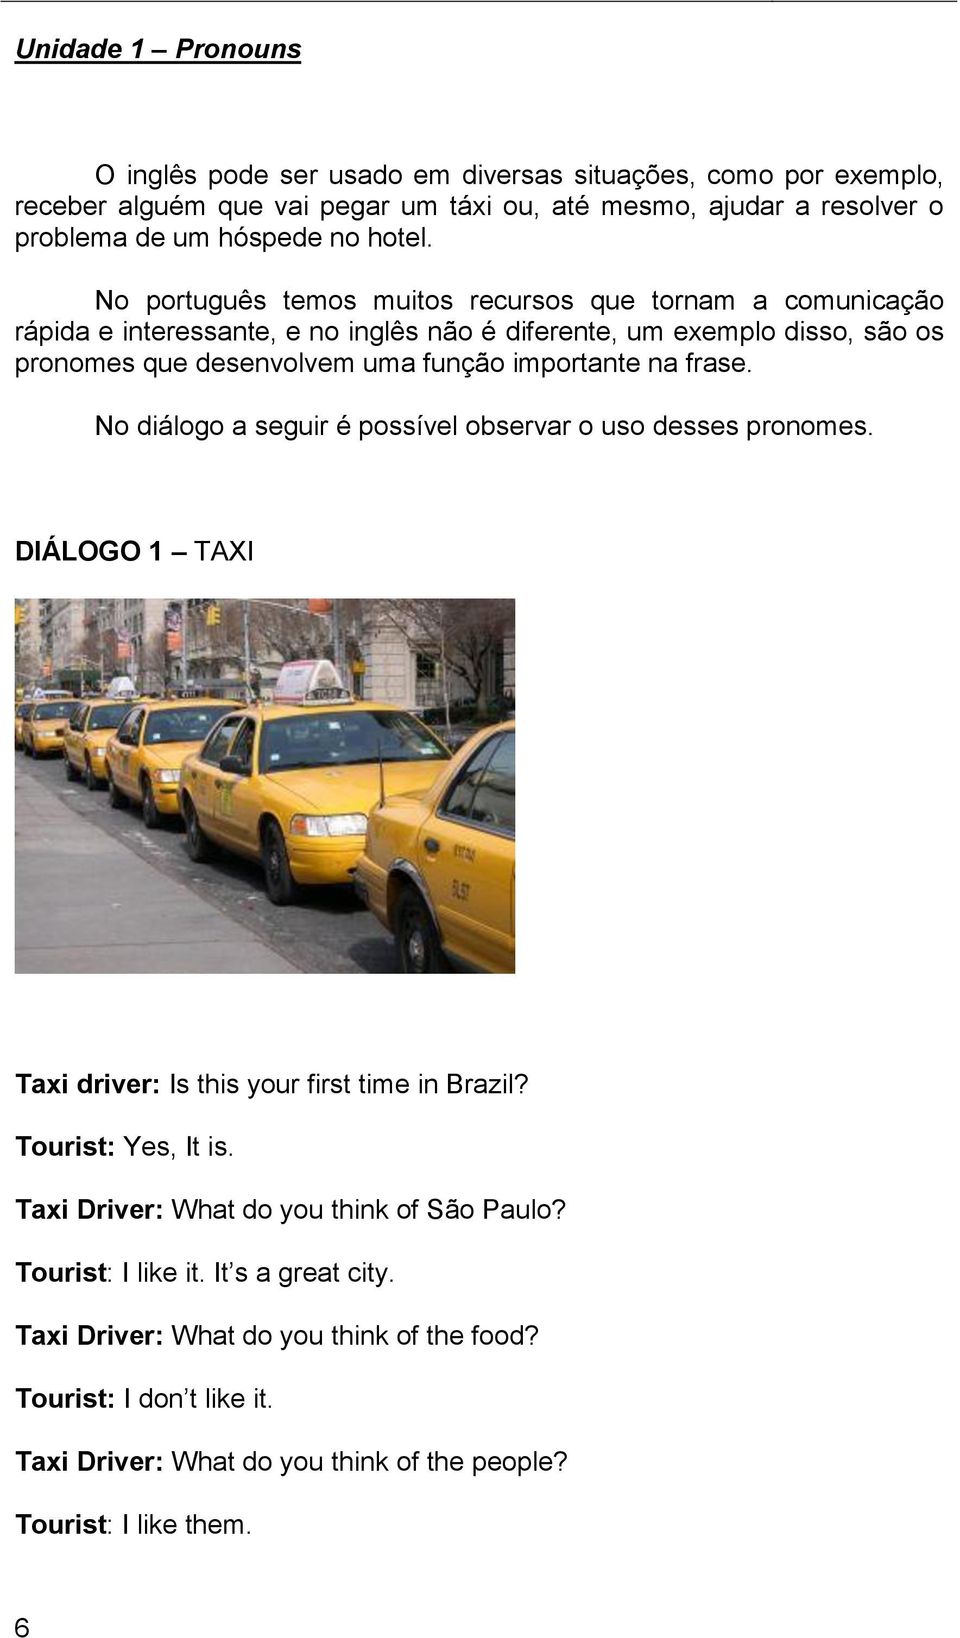 frase. No diálogo a seguir é possível observar o uso desses pronomes. DIÁLOGO 1 TAXI Taxi driver: Is this your first time in Brazil? Tourist: Yes, It is.